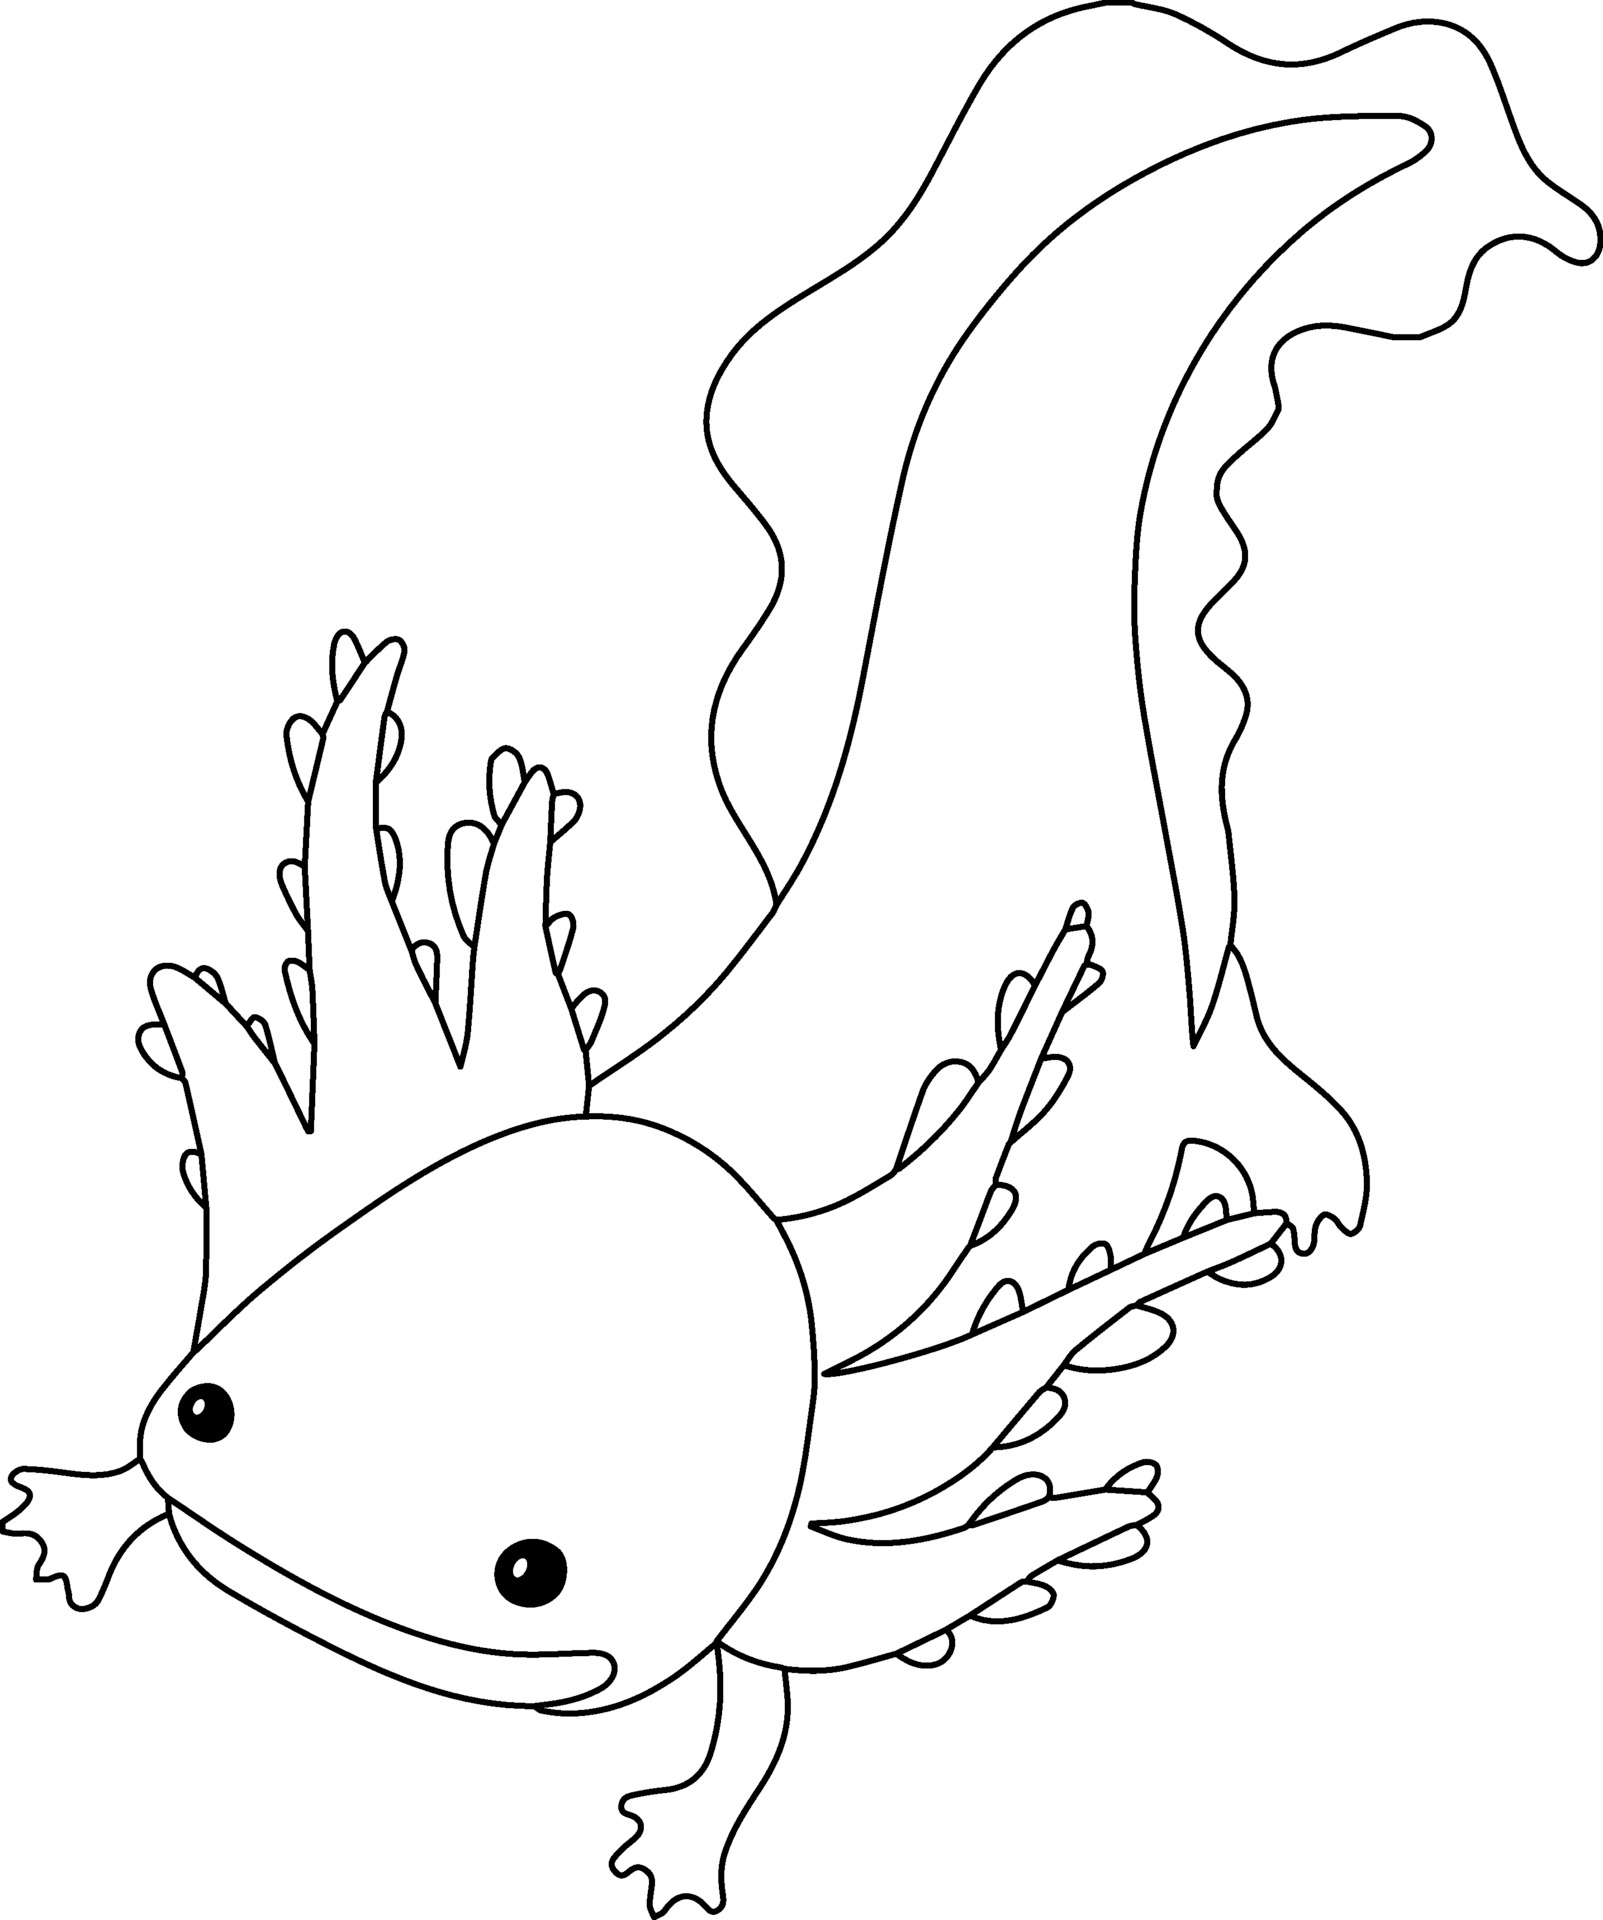 Axolotl Kids Coloring Page Great for Beginner Coloring Book ...